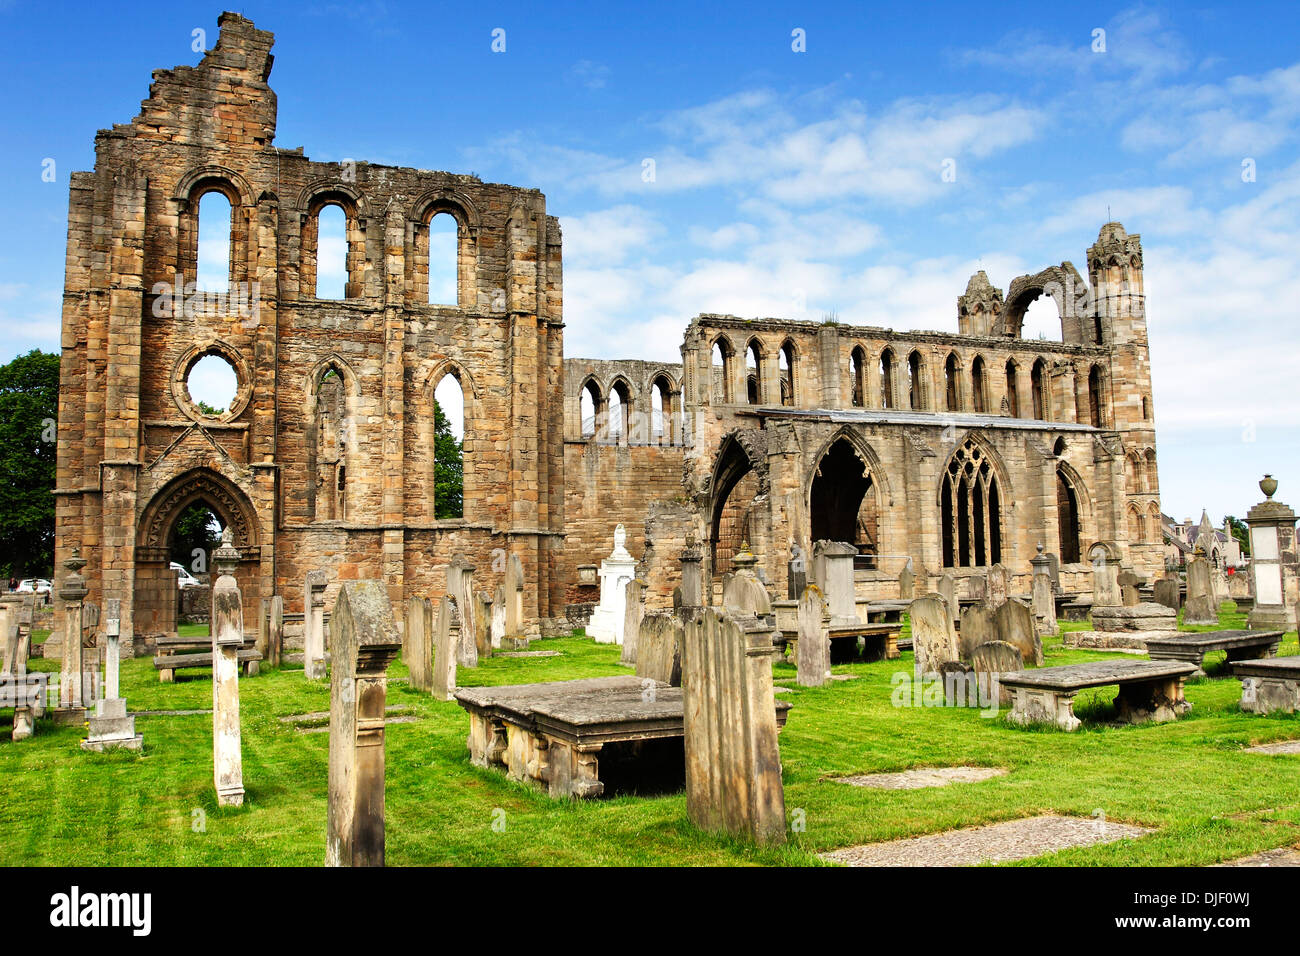 A view of the ruins and gravestones of the medieval Cathedral at Elgin in the Highlands of Scotland. Stock Photo